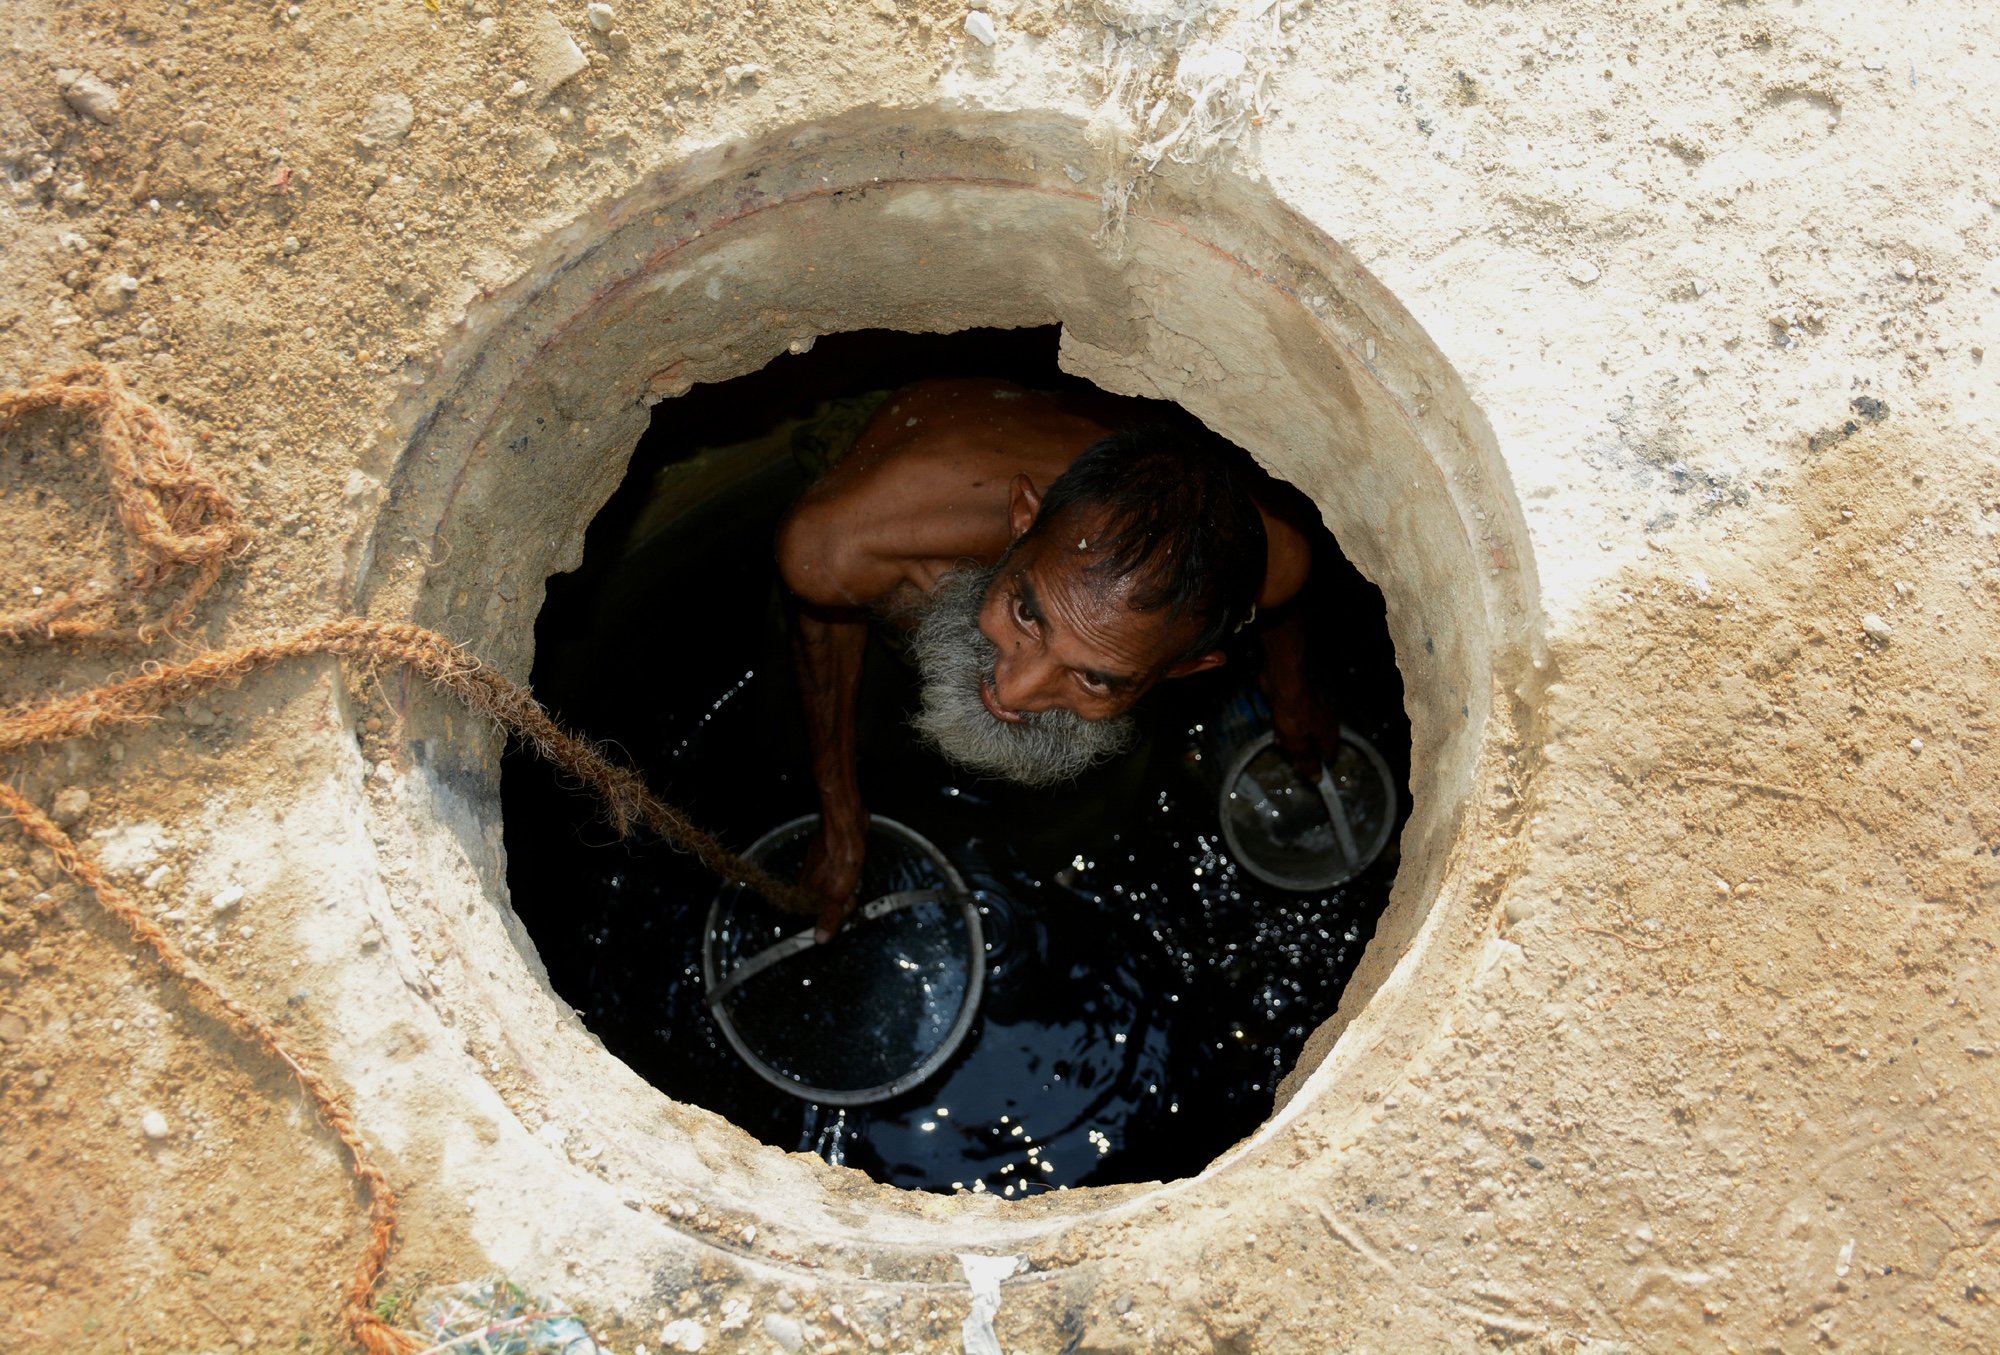 You are currently viewing Sewer Cleaners Wanted in Pakistan: Only Christians Need Apply.